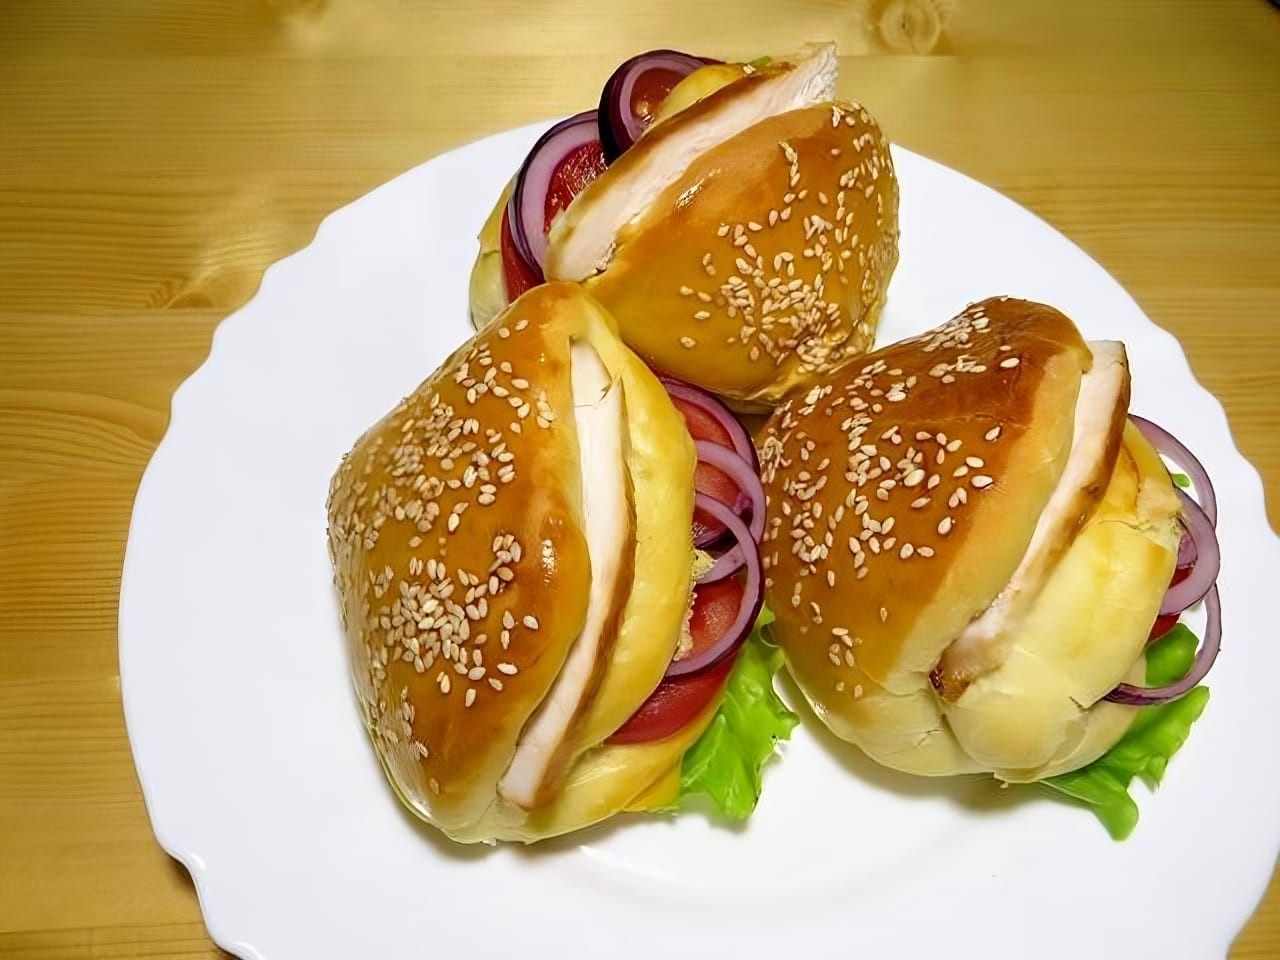 Sandwich Buns for the Most Delicious Snack in Your Life